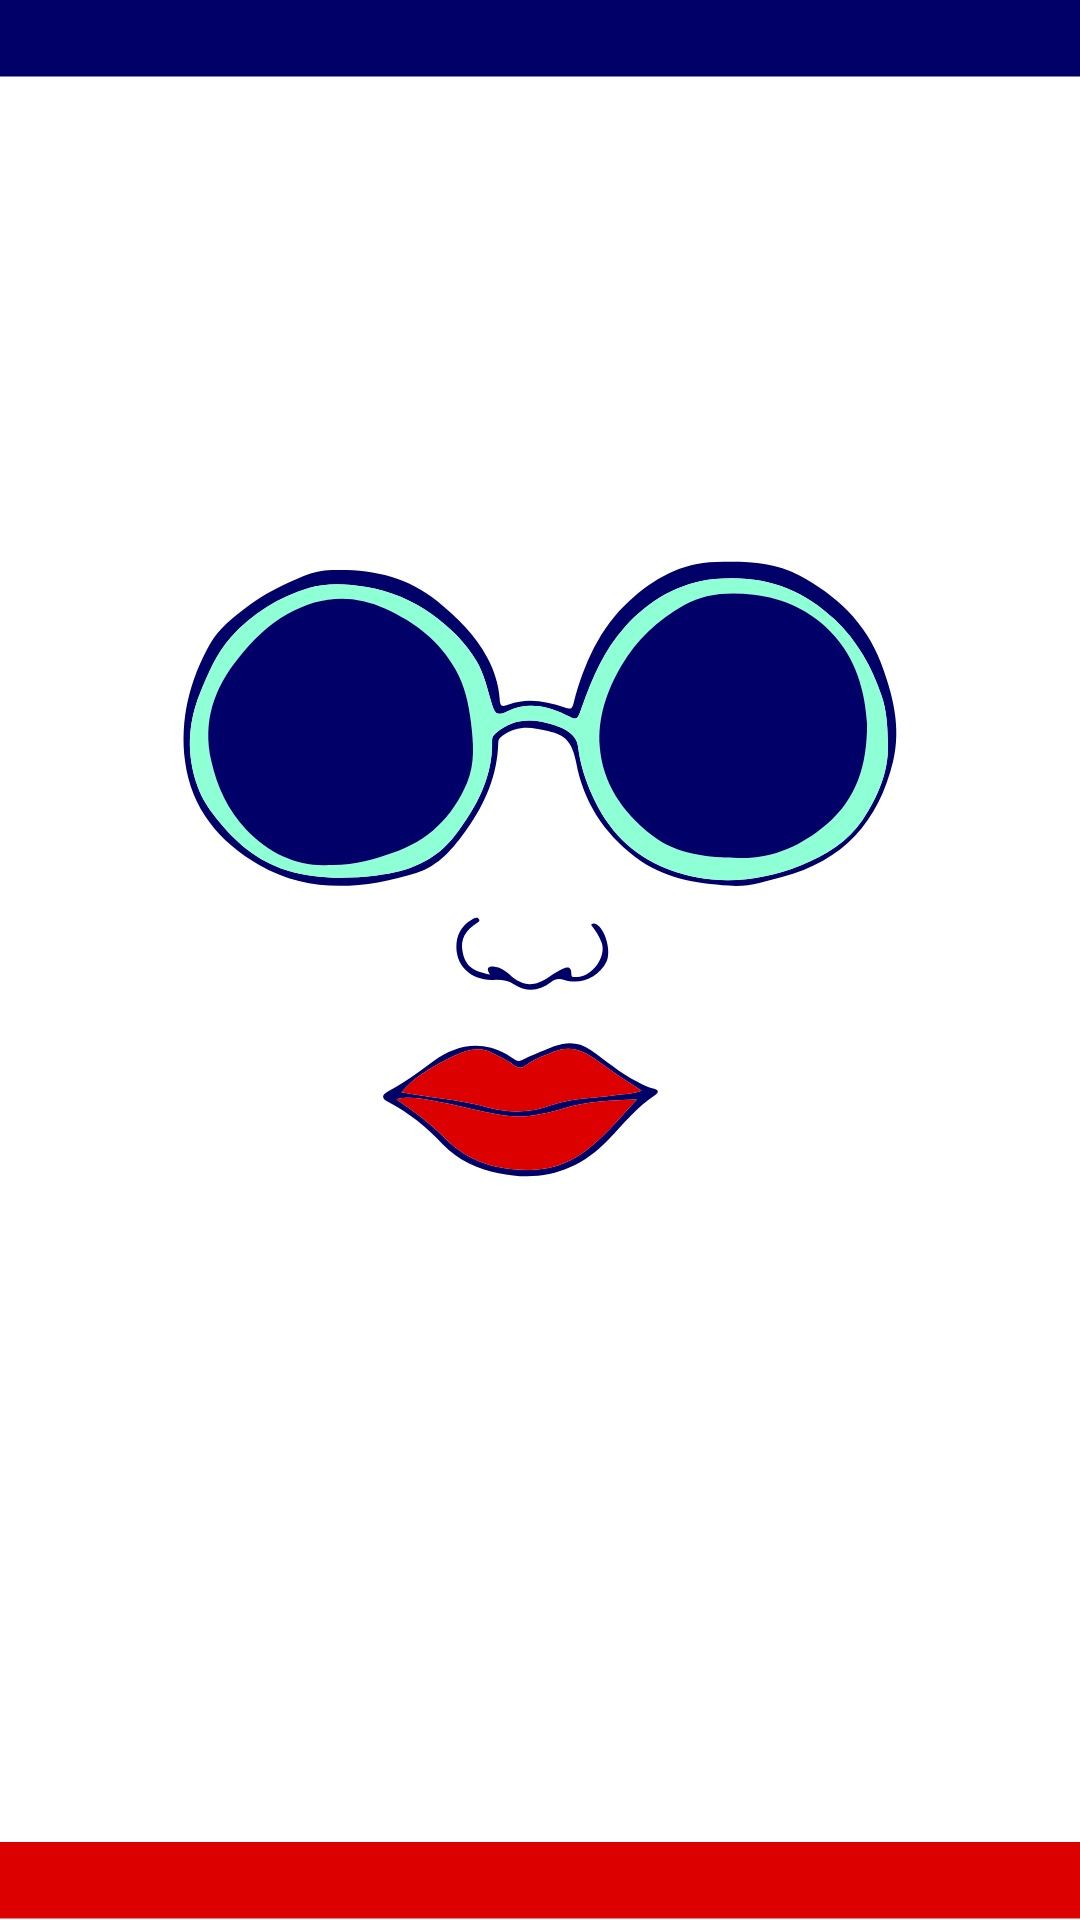 Abstract image of a woman's face in sunglasses - Prospect of sharing before-and-after images on Instagram - Image